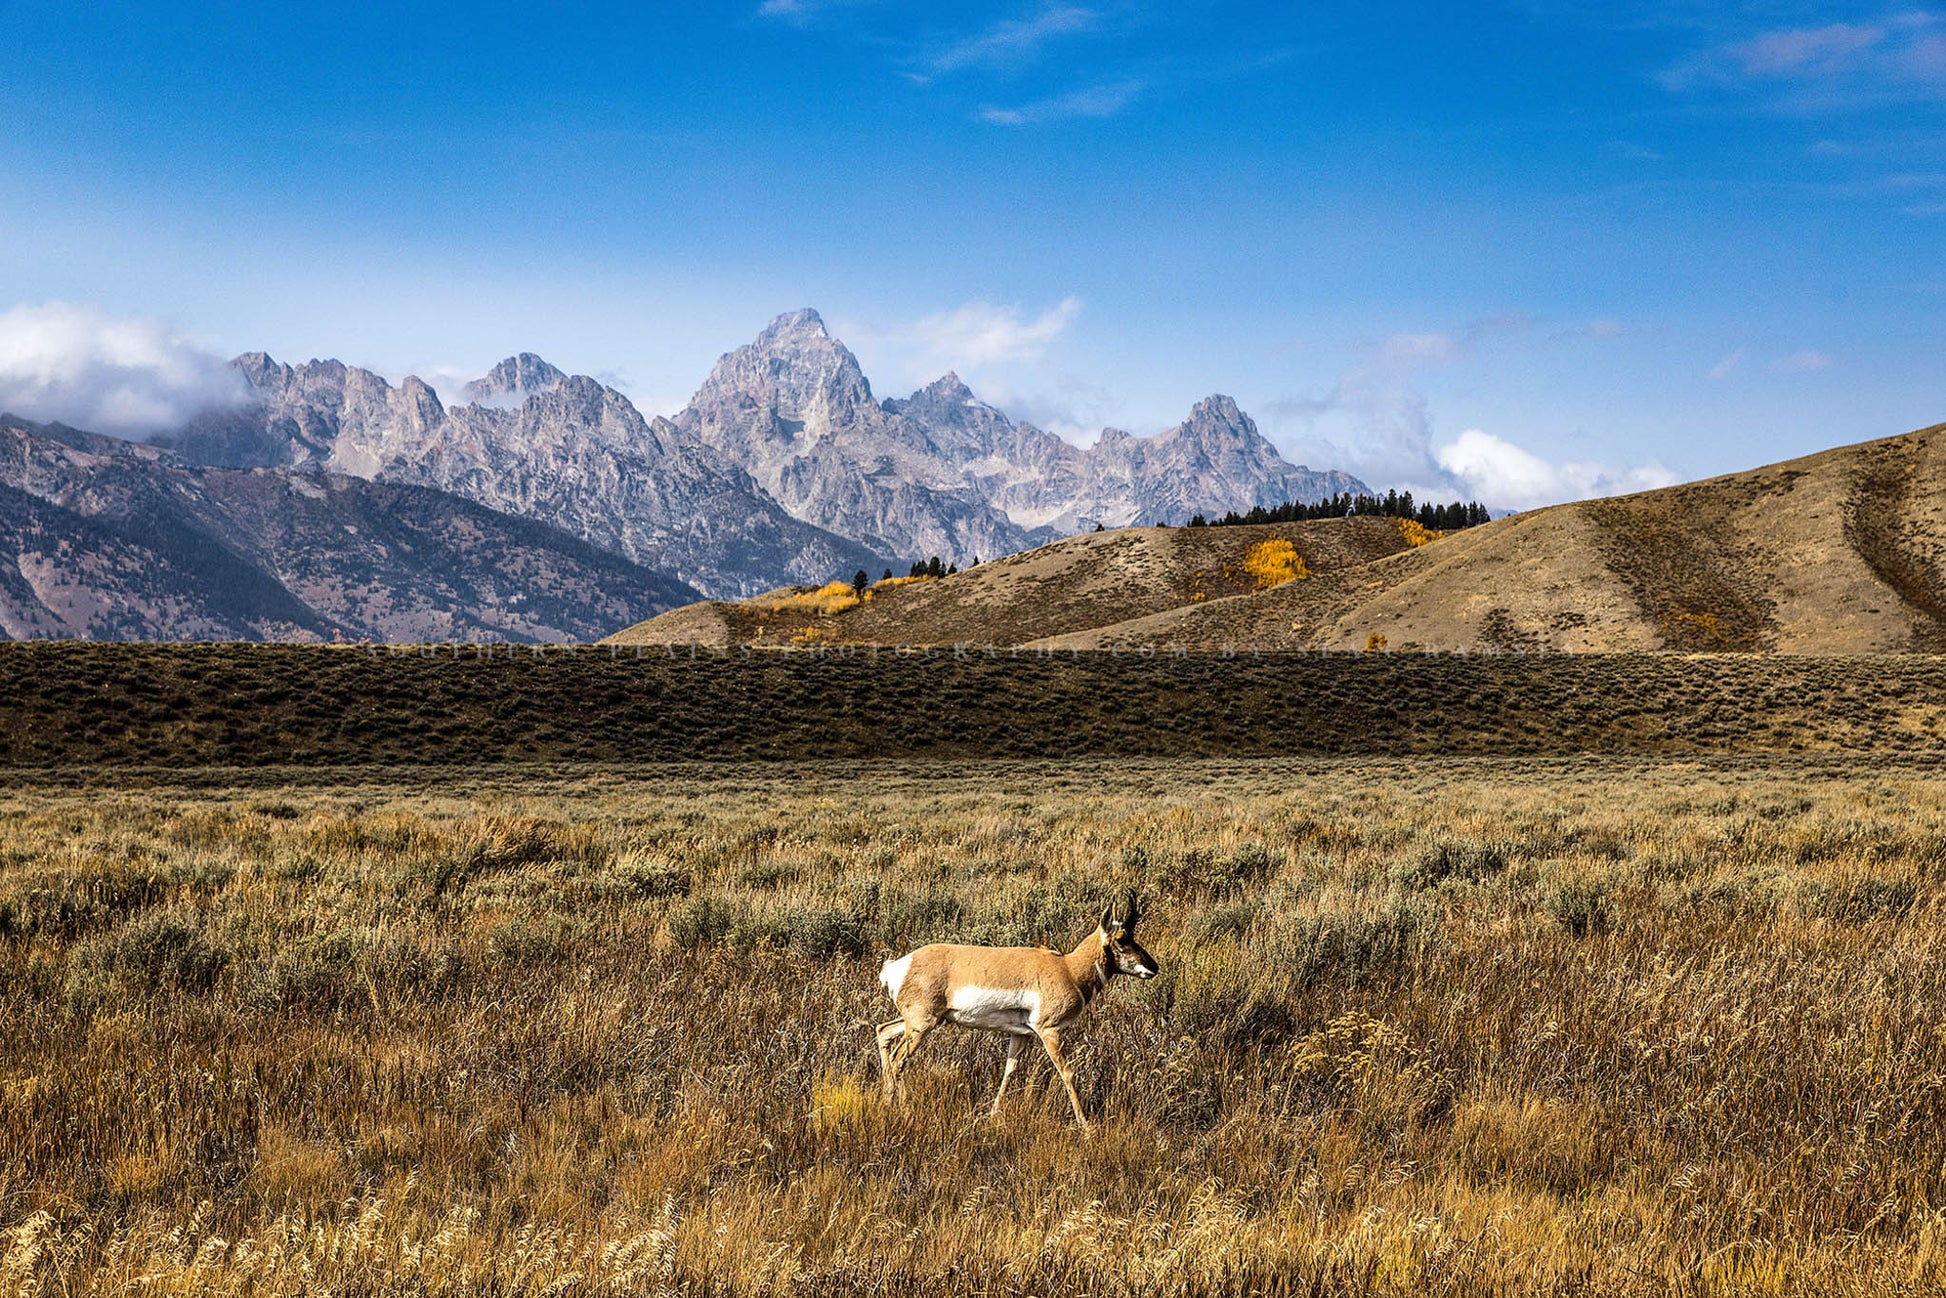 Wildlife photography print of an antelope taking a stroll on an autumn day in Grand Teton National Park, Wyoming by Sean Ramsey of Southern Plains Photography.